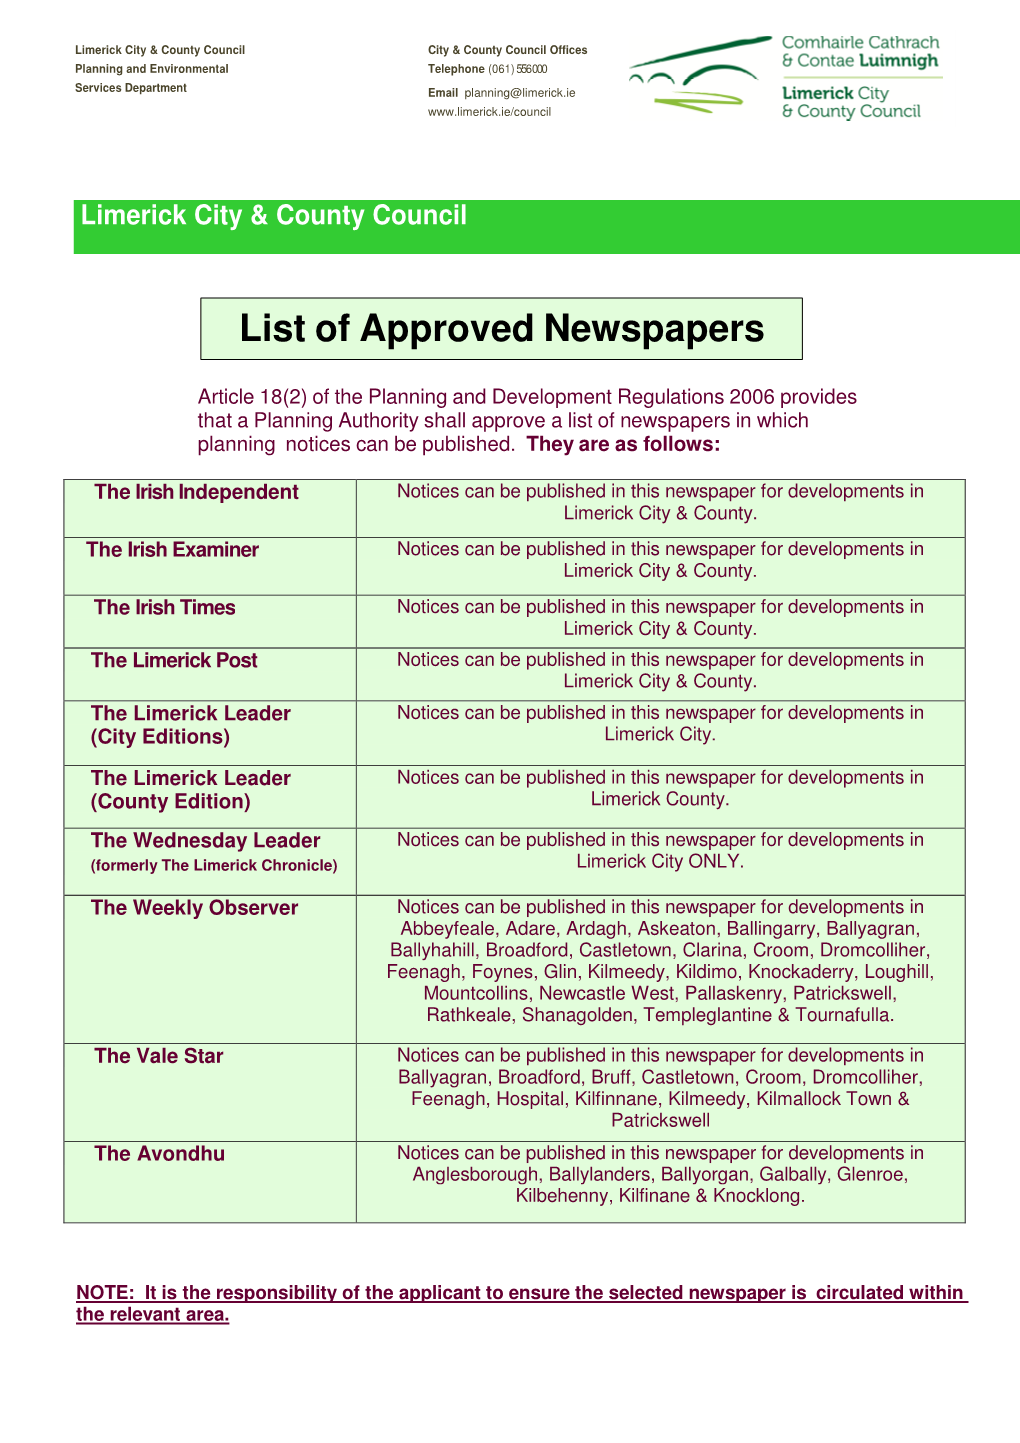 List of Approved Newspapers